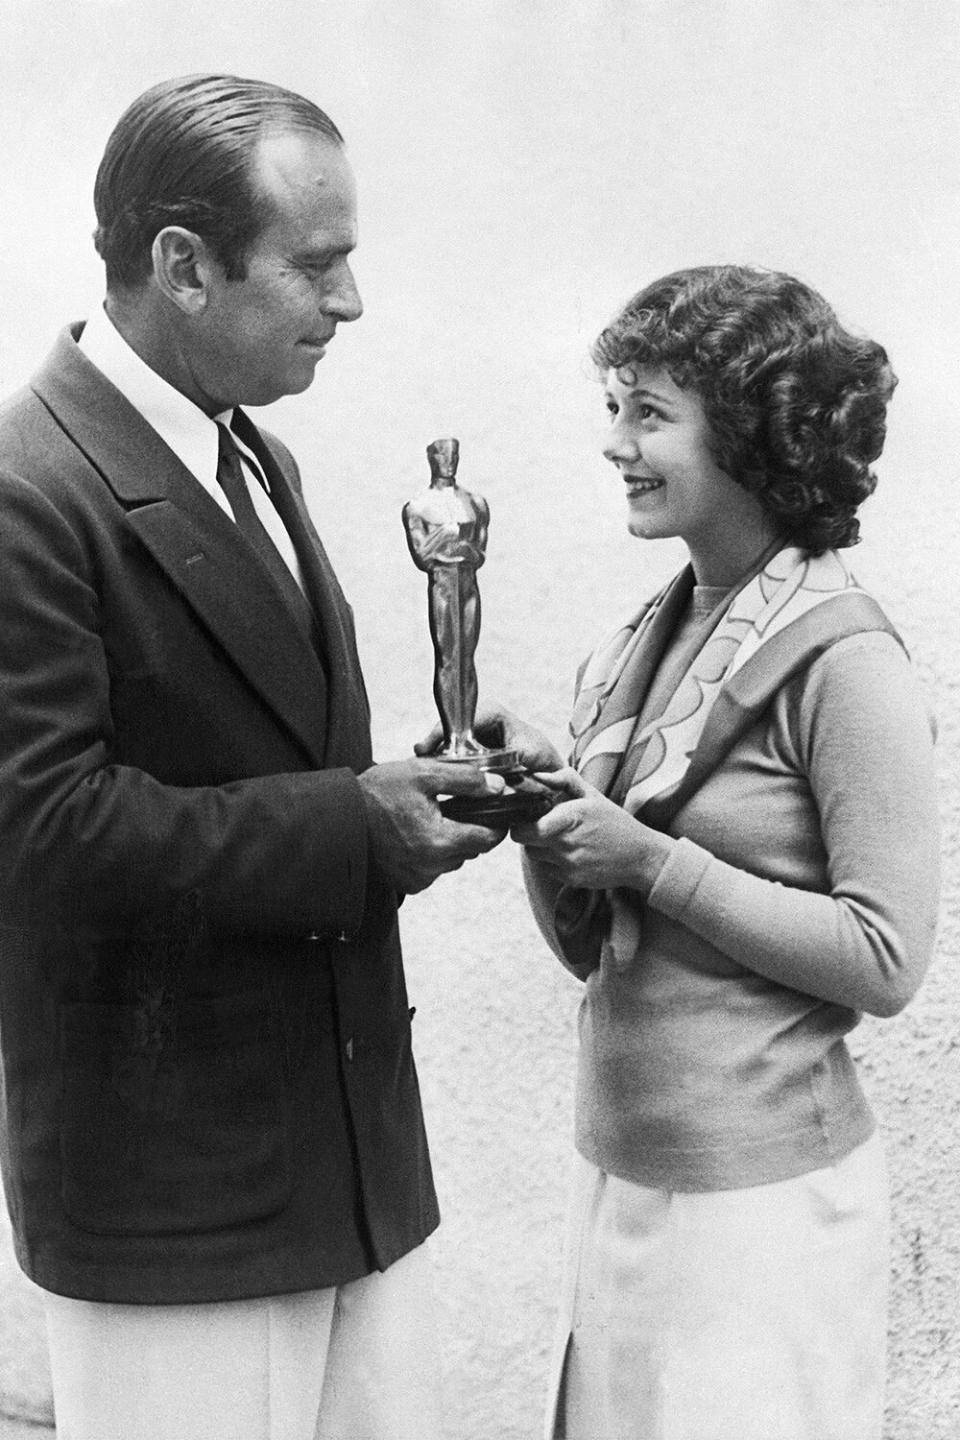 Douglas Fairbanks presents Janet Gaynor with the first Academy Award for Best Actress, for her work in Seventh Heaven, as well as Street Angel, and Sunrise, at the first Academy Awards in 1929.